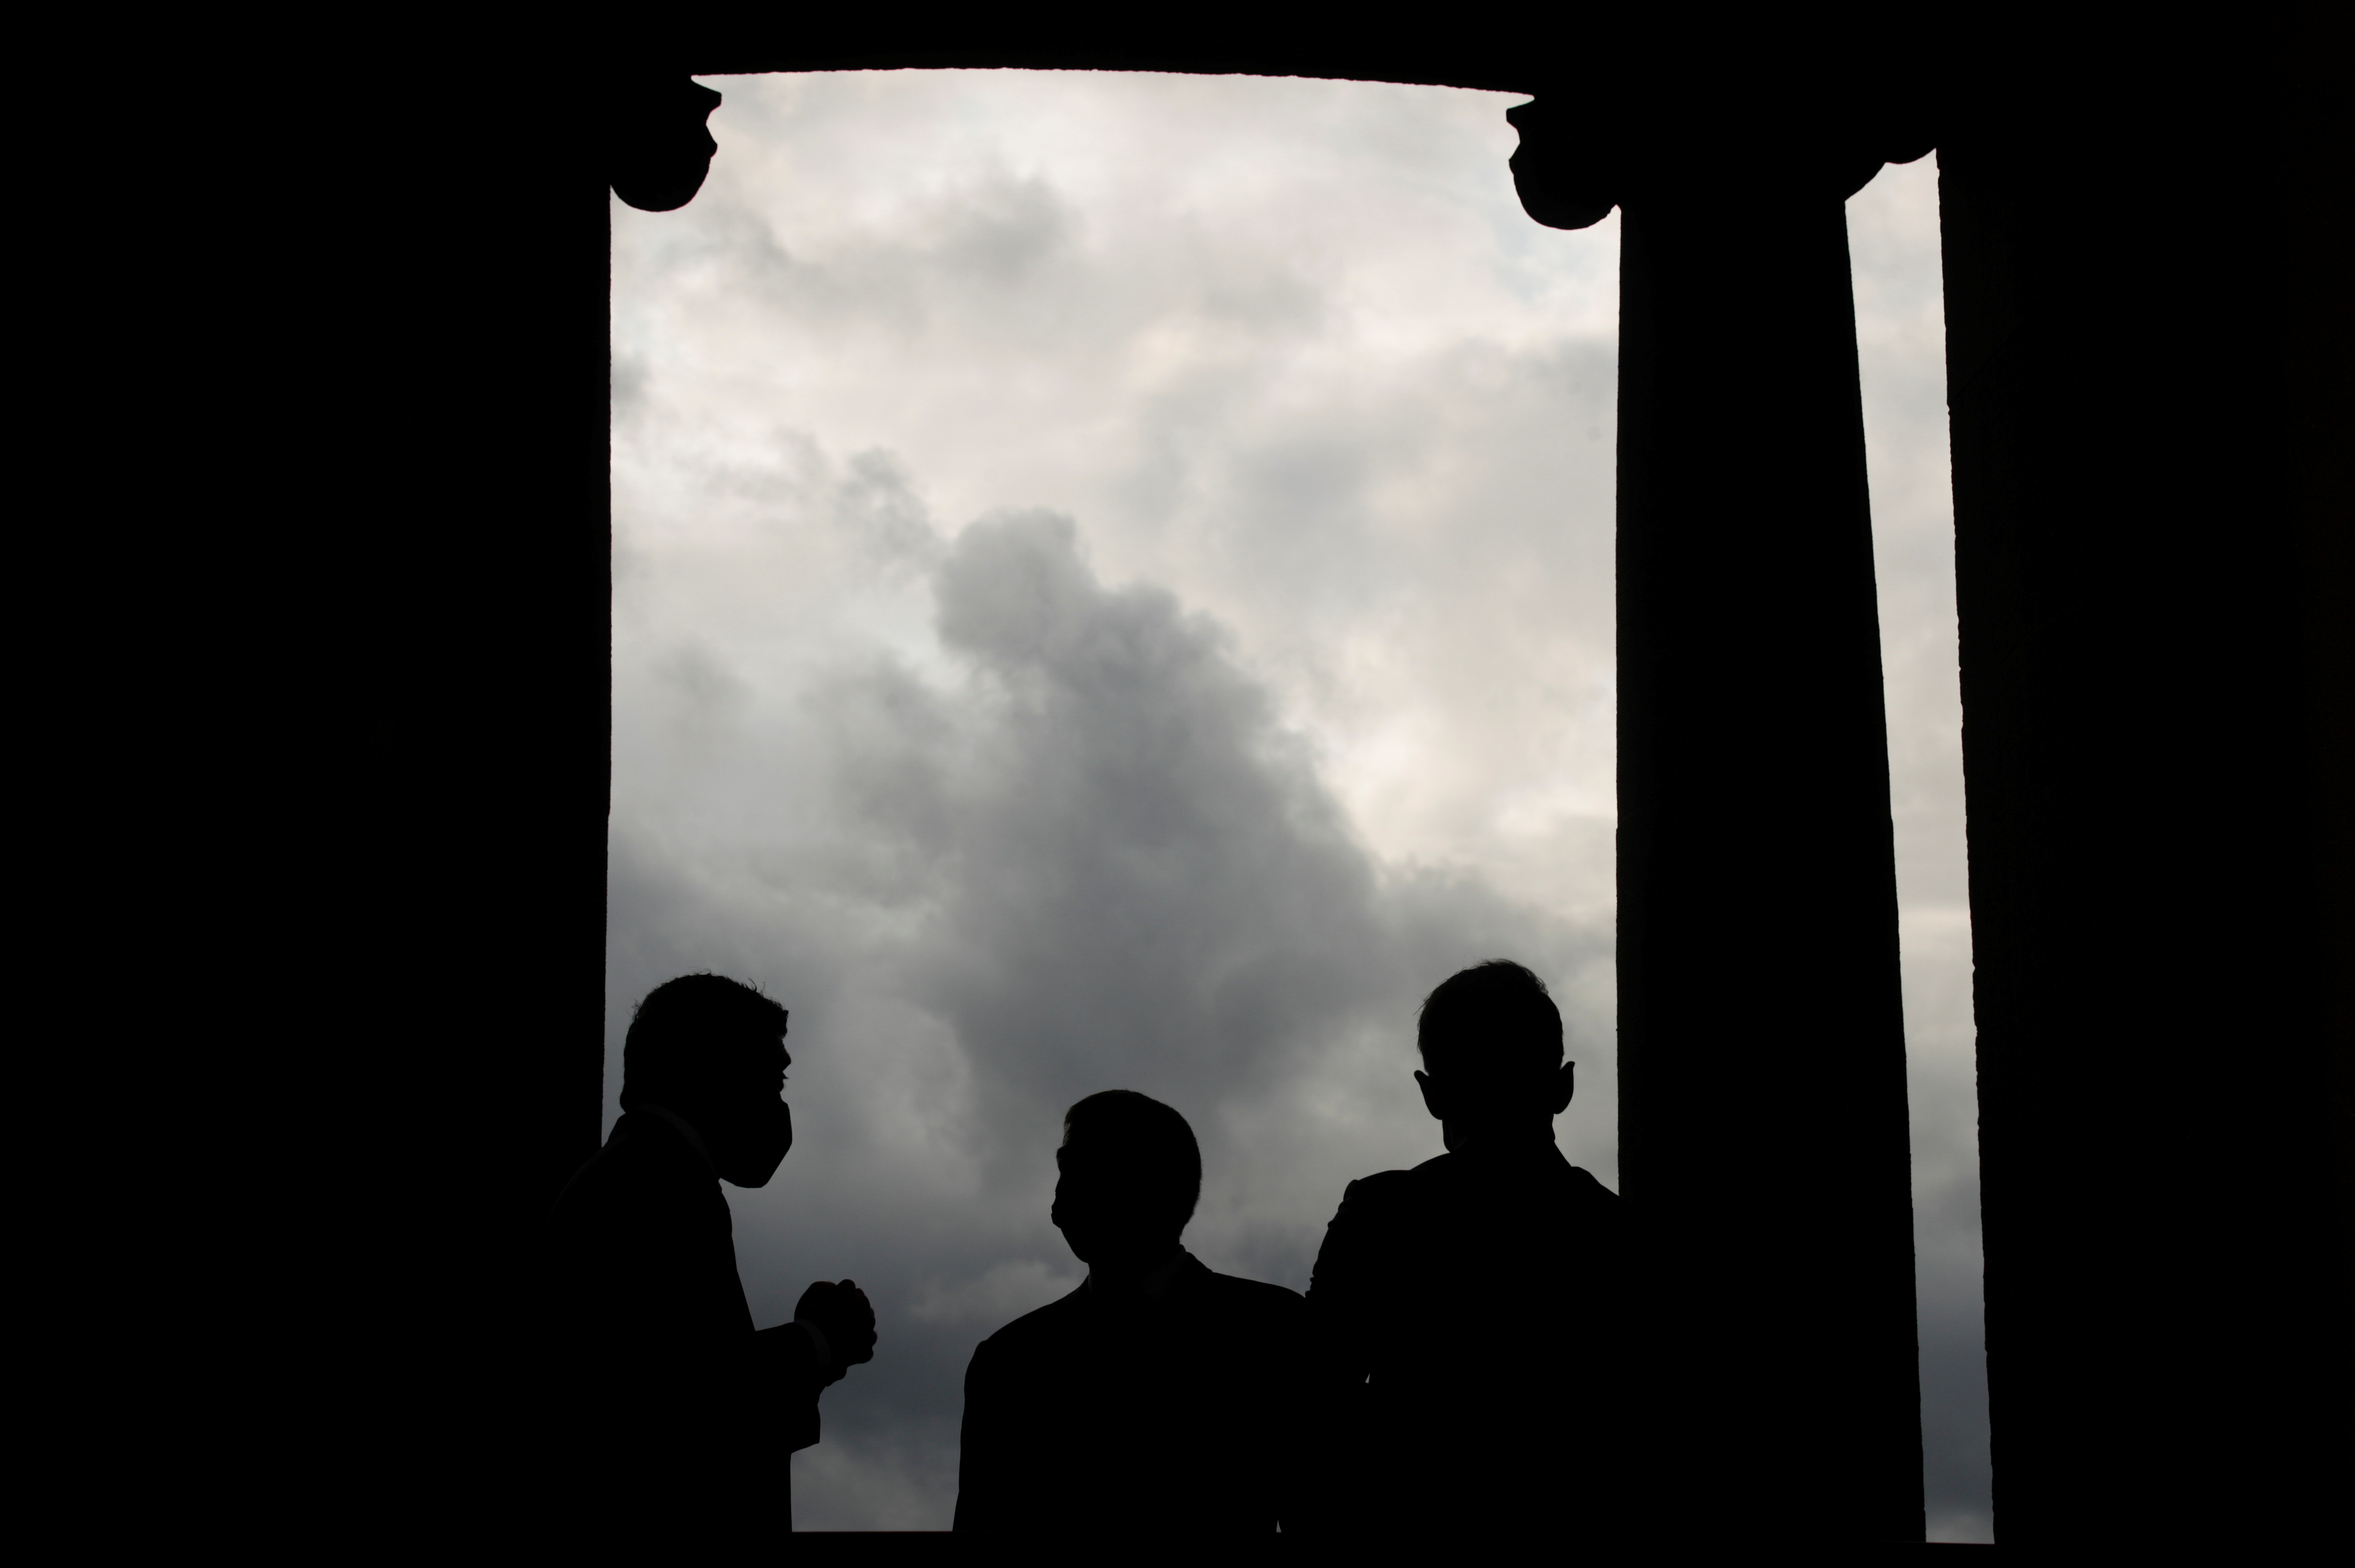 Silhouettes of UAE Foreign Minister Sheikh Abdullah bin Zayed al-Nahyan, his Israeli counterpart Gabi Ashkenazi and German Foreign Minister Heiko Maas are pictured before their historic meeting at Villa Borsig in Berlin